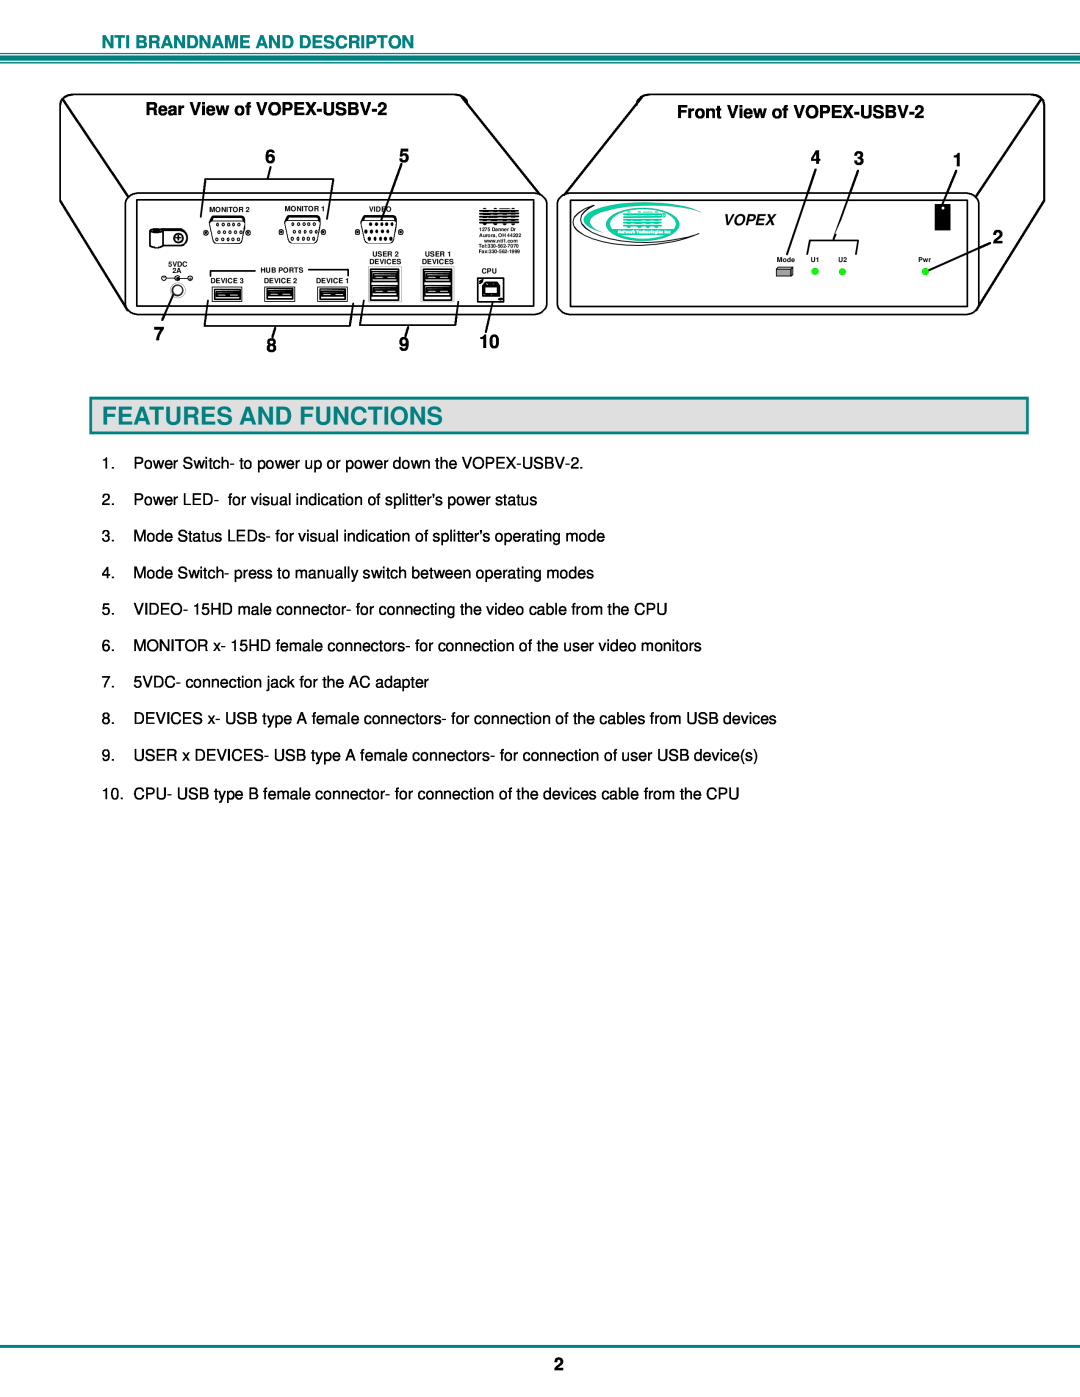 Network Technologies Features And Functions, Rear View of VOPEX-USBV-2, Front View of VOPEX-USBV-2, Vopex 